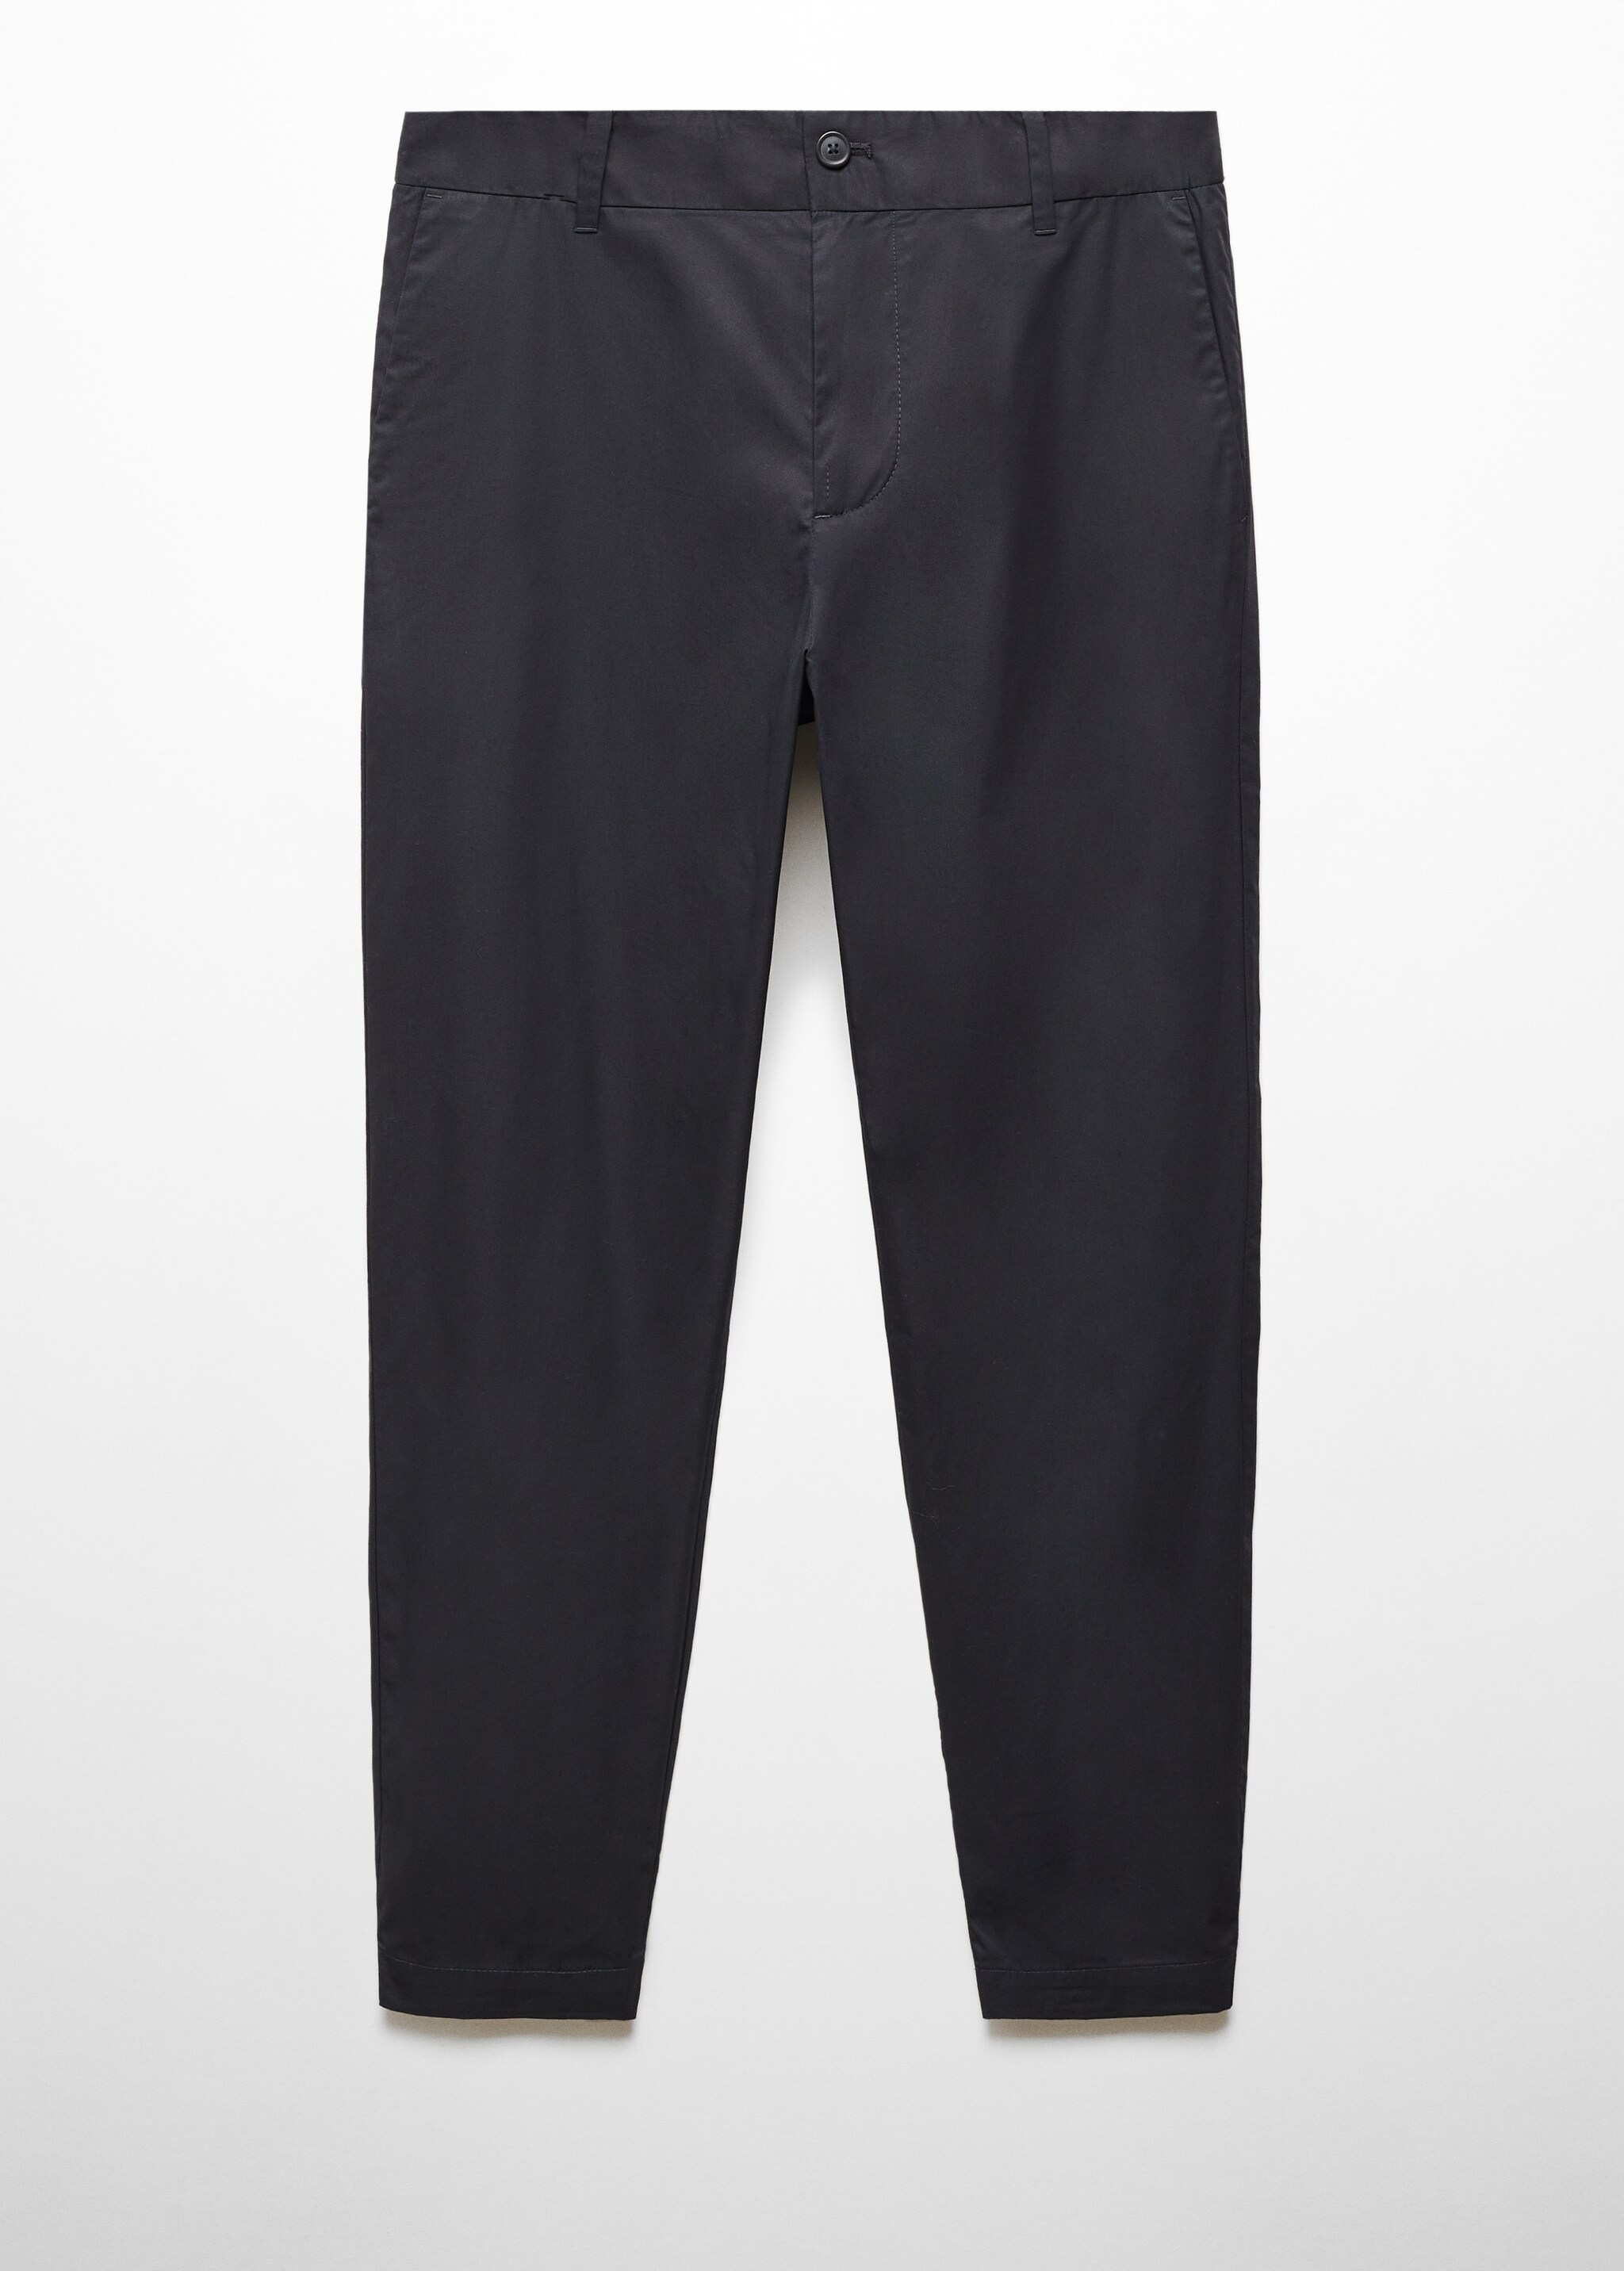 100% slim-fit cotton trousers - Article without model